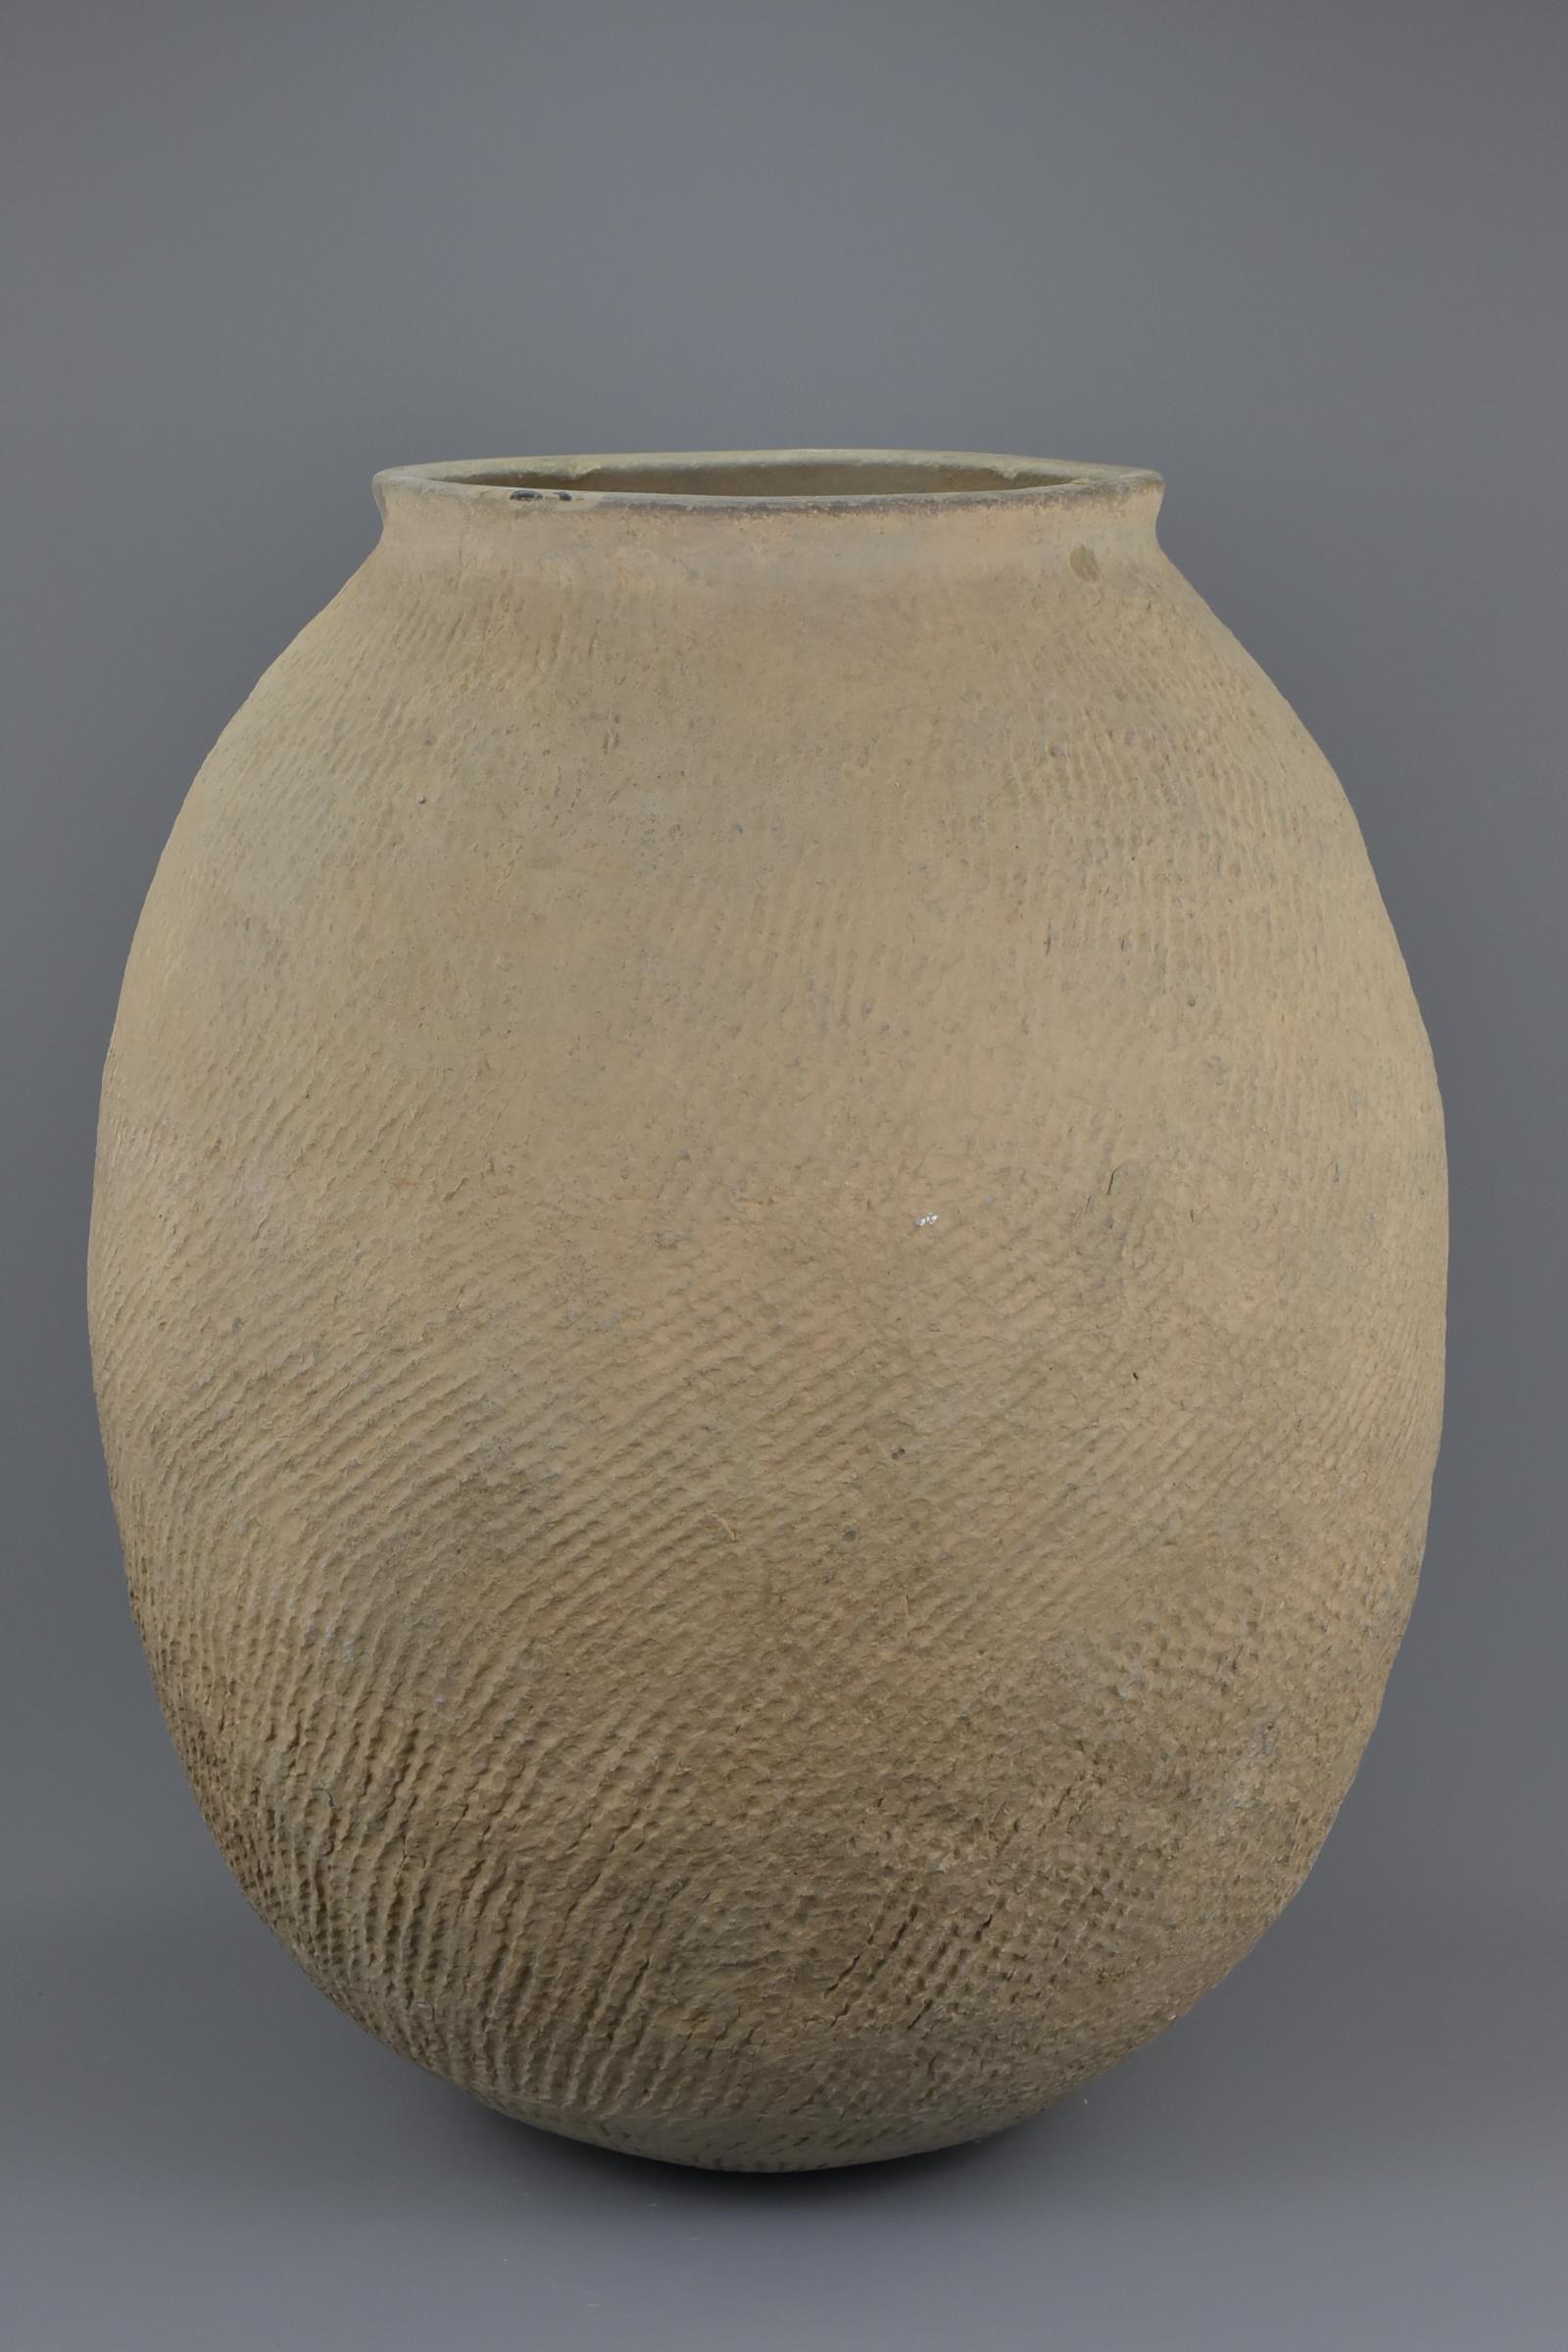 An Exceptionally LARGE Chinese Neolithic / Bronze Age Impressed Pottery Jar with Oxford TL Test - Image 3 of 7